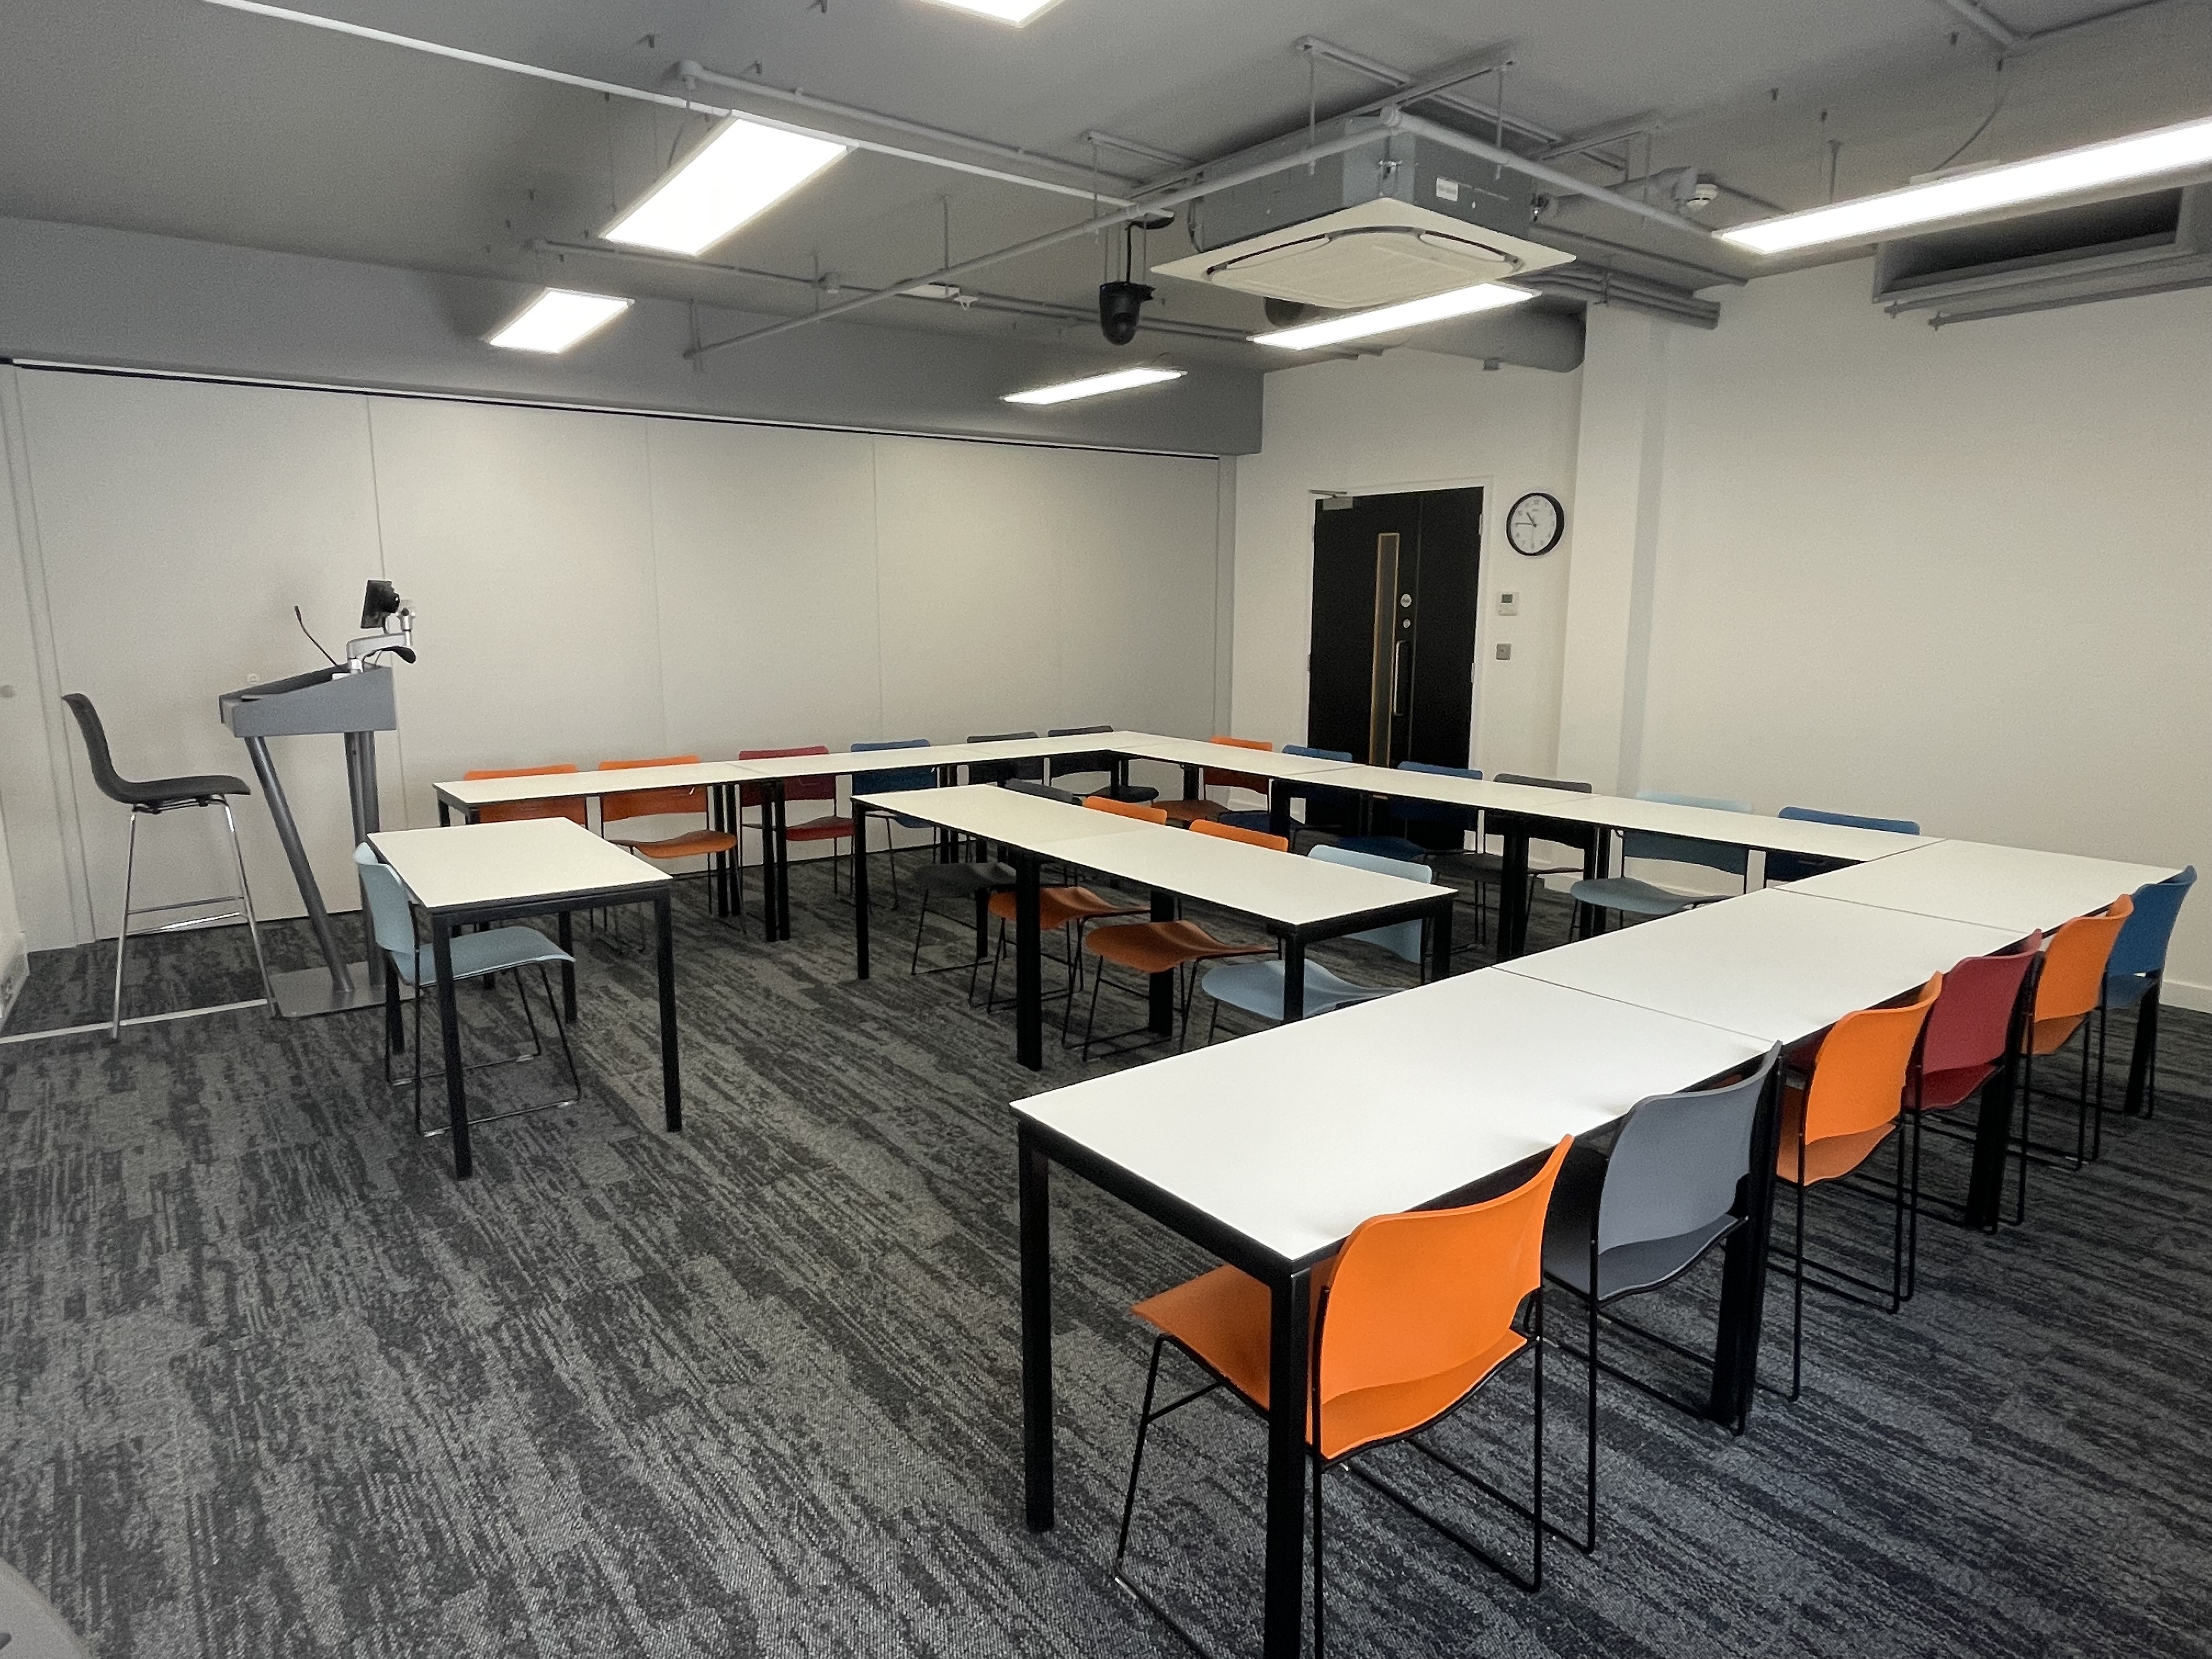 Table and chair configuration, view from the front of the classroom